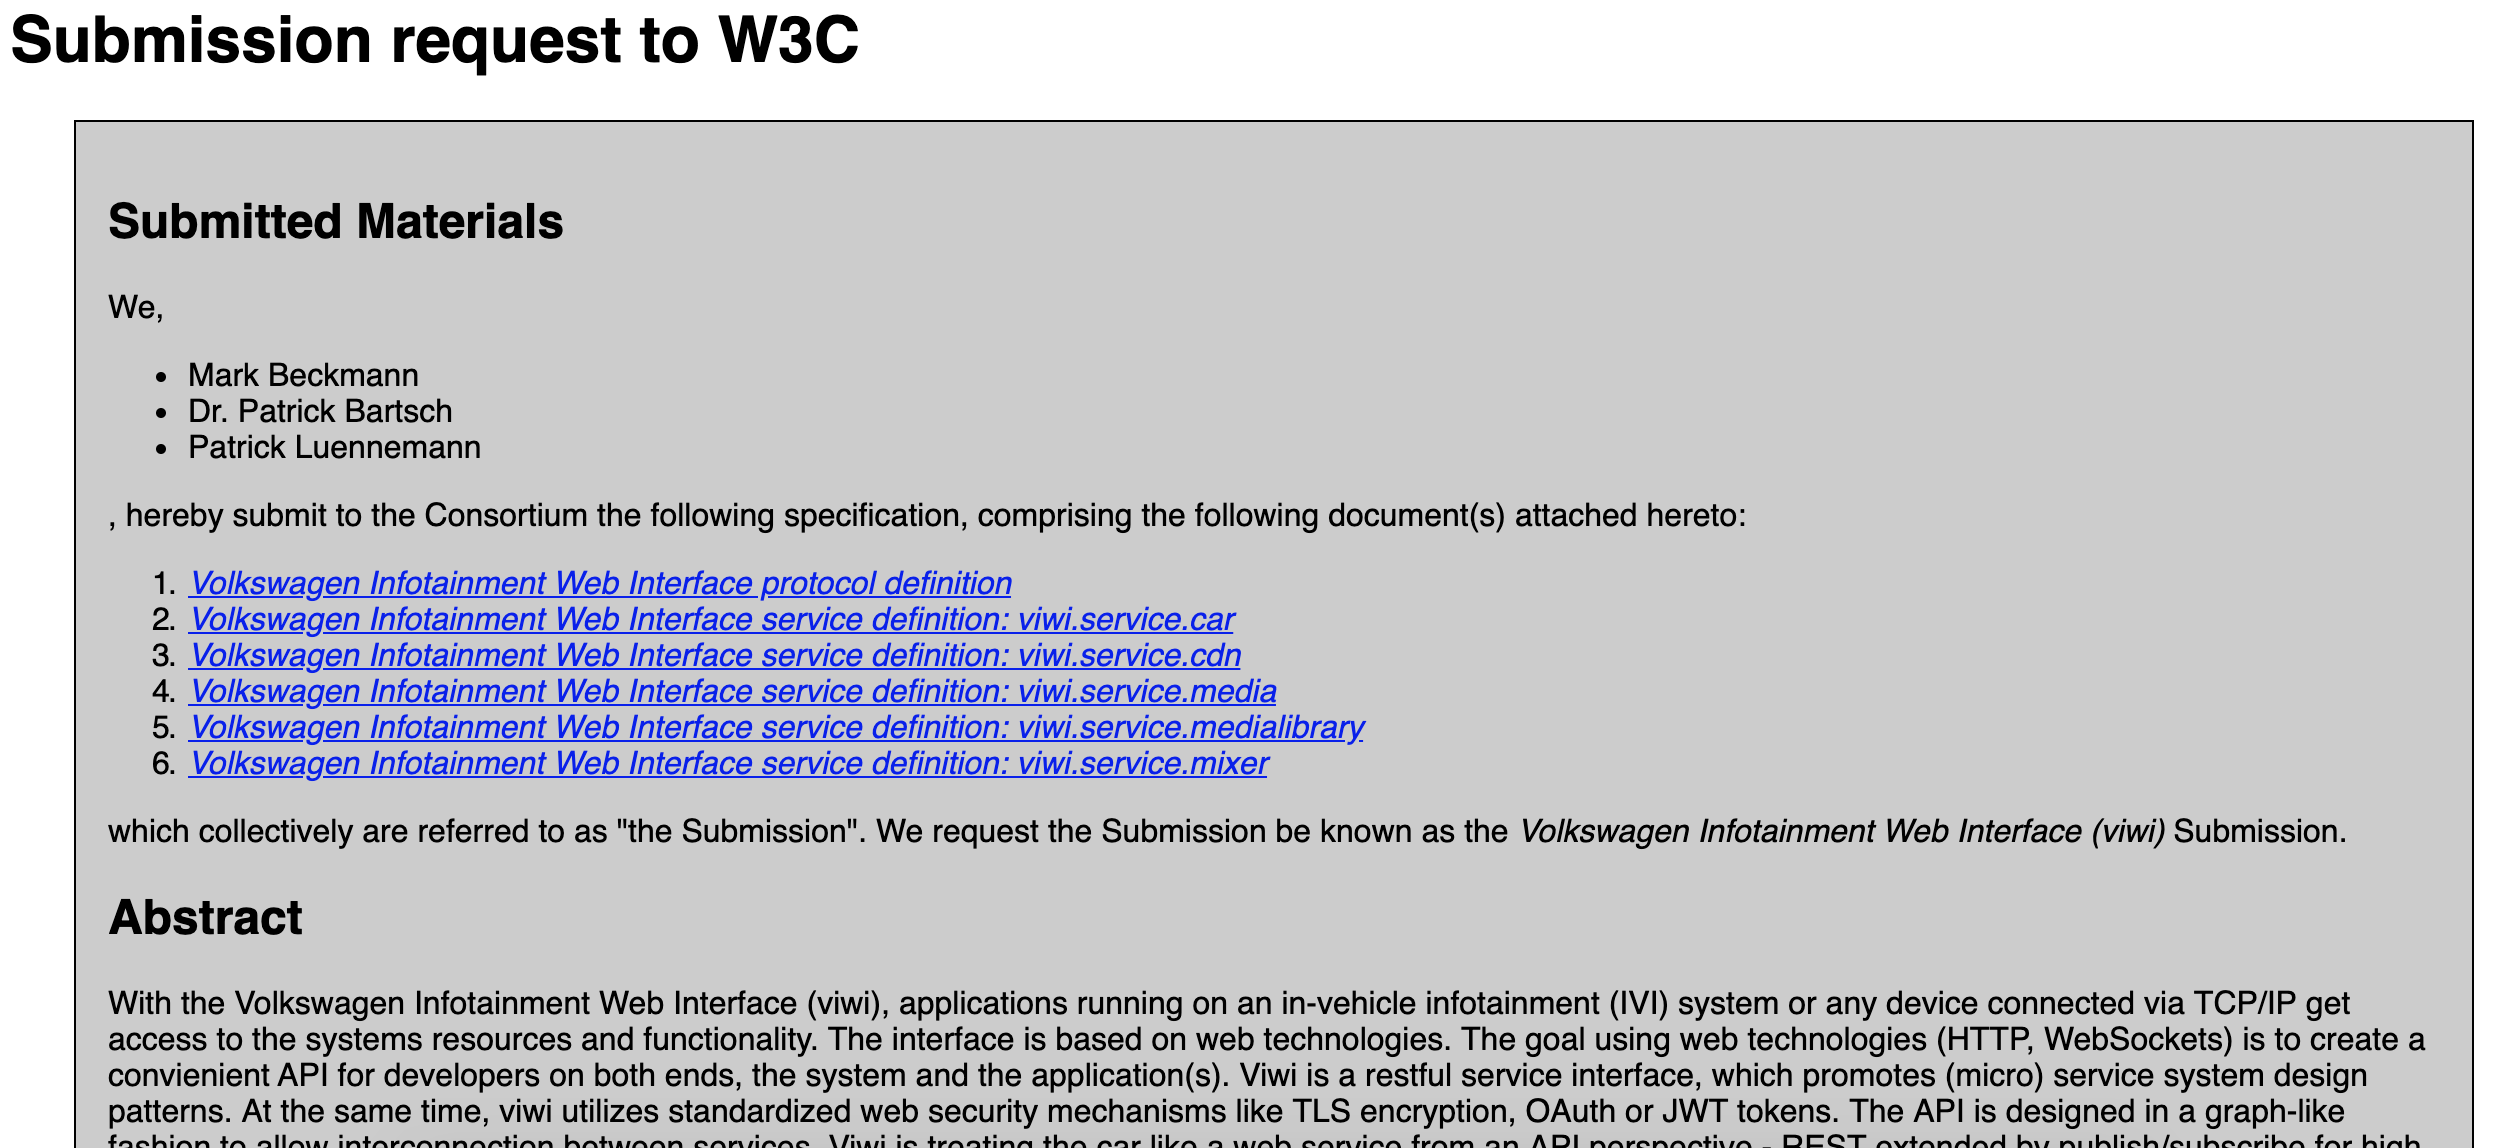 W3C member submission